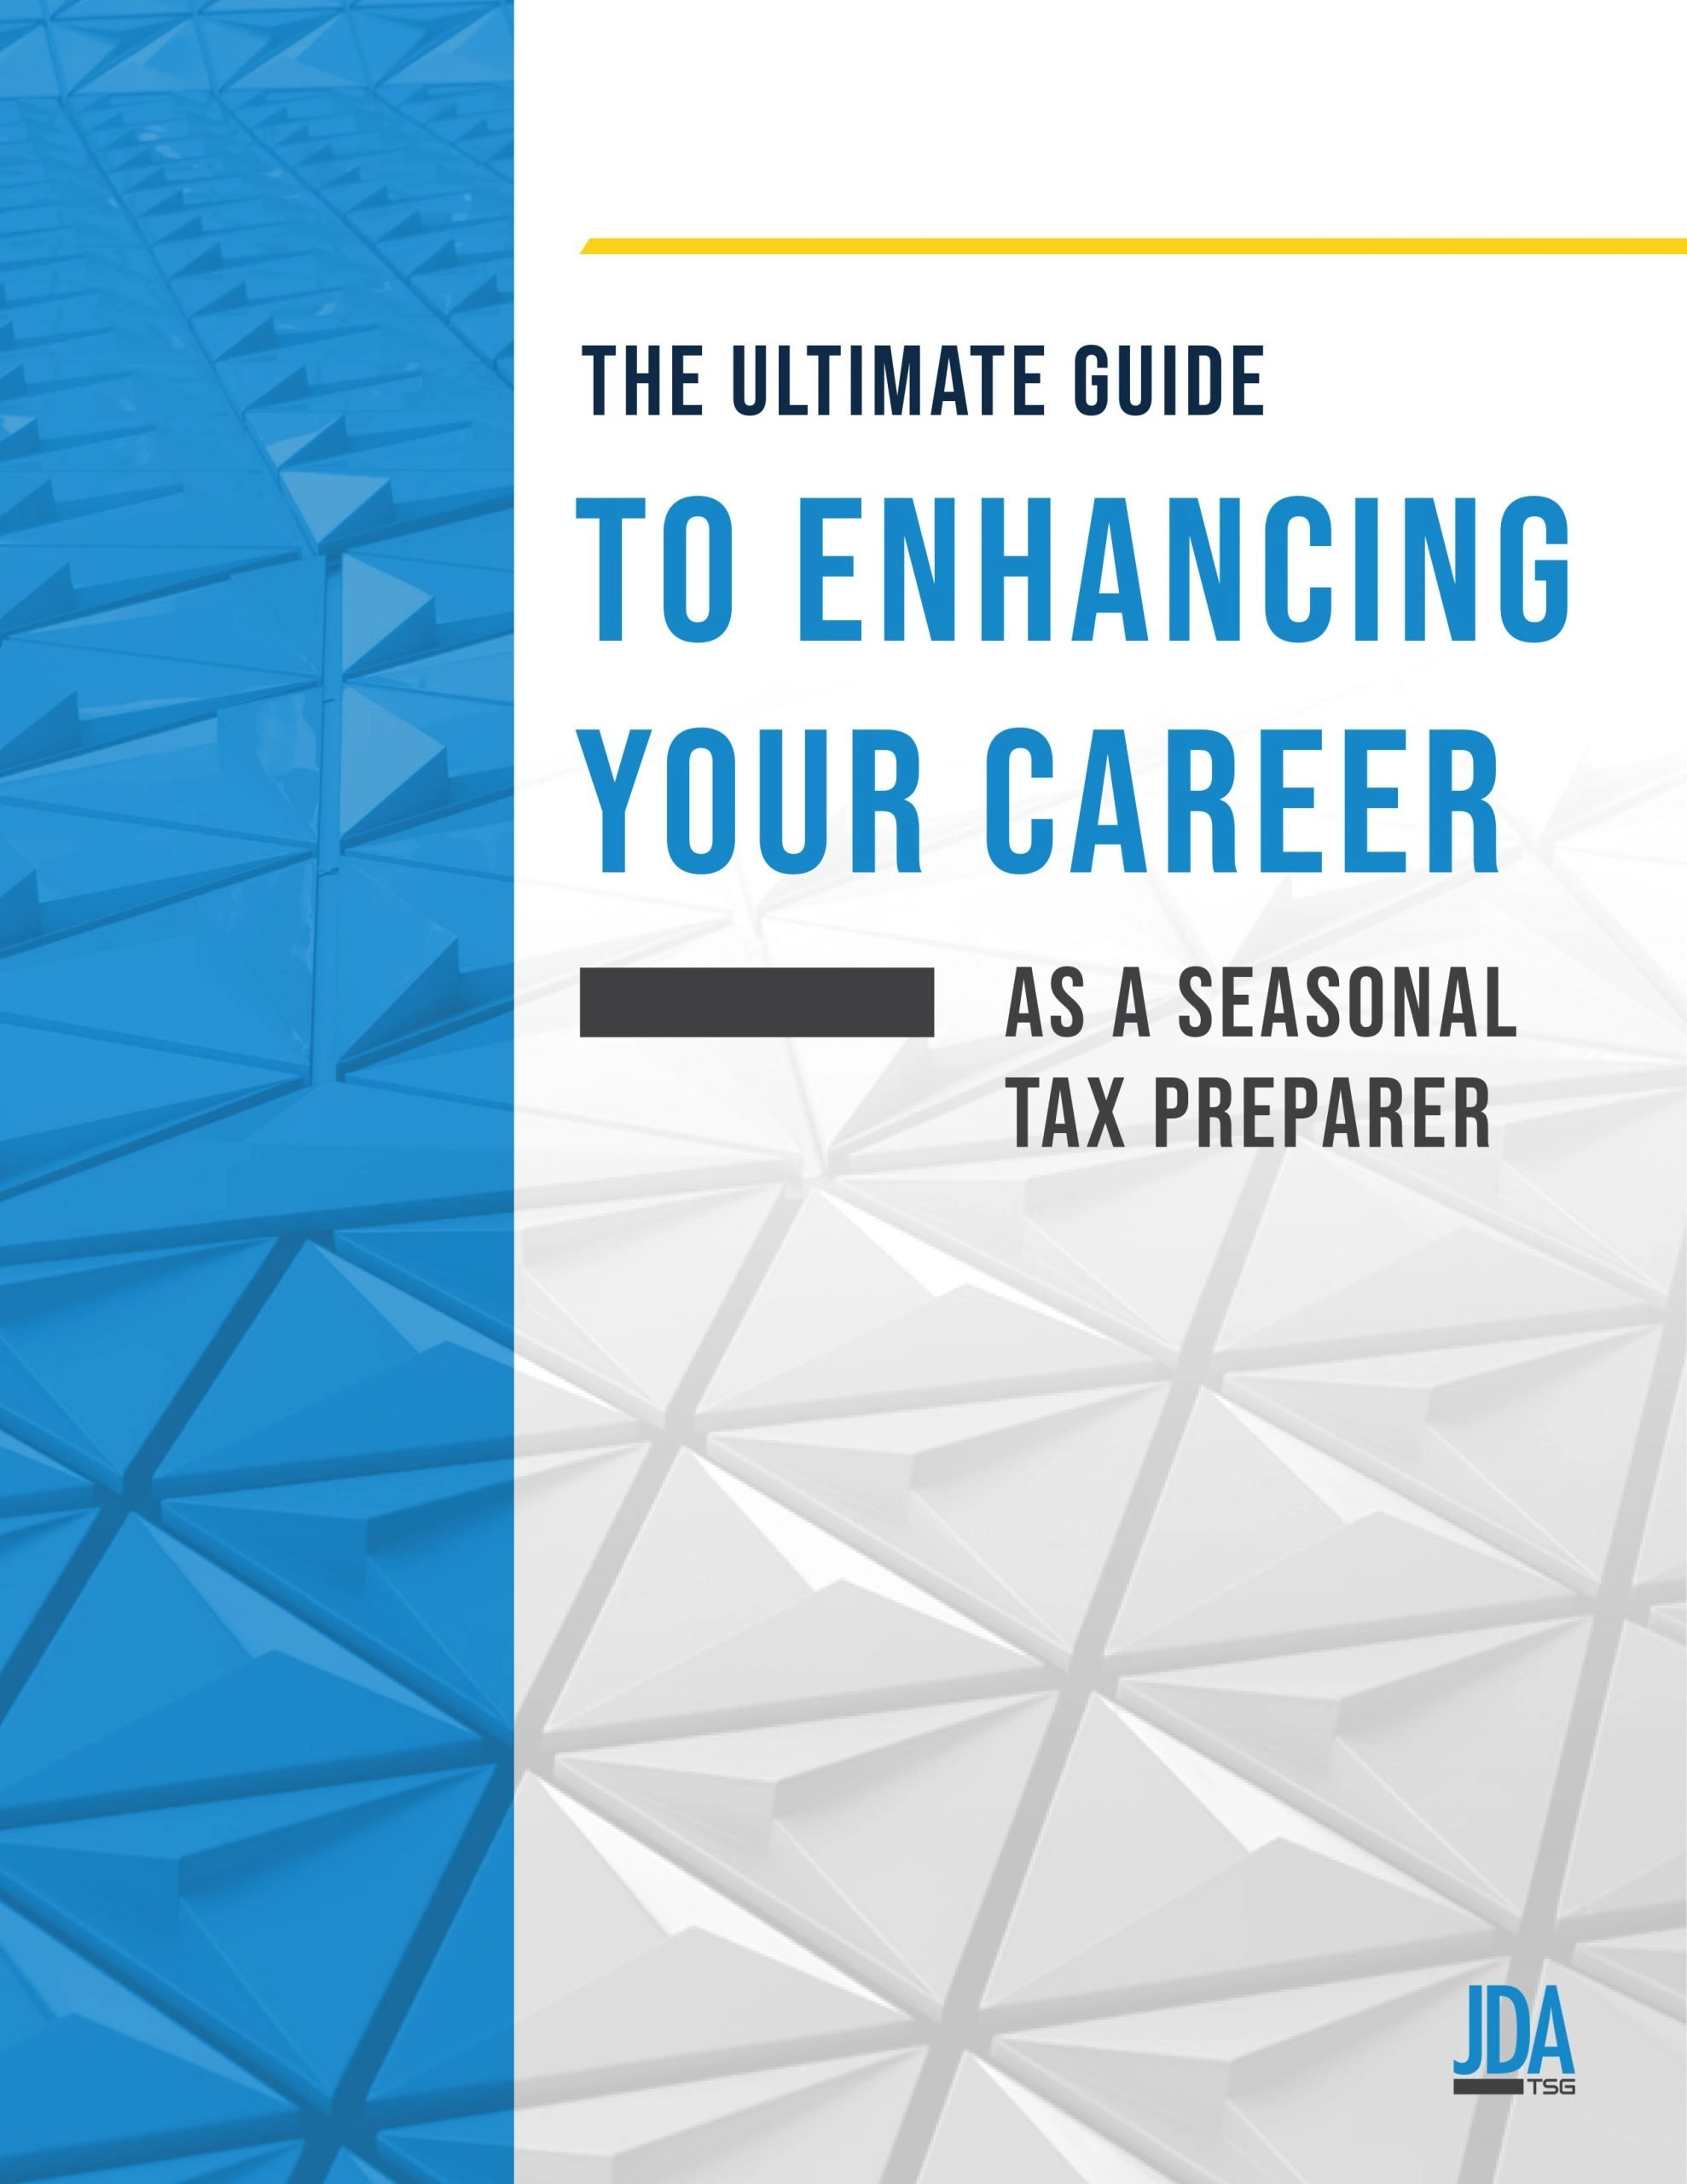 The Ultimate Guide to Enhancing Your Career as a Seasonal Tax Preparer